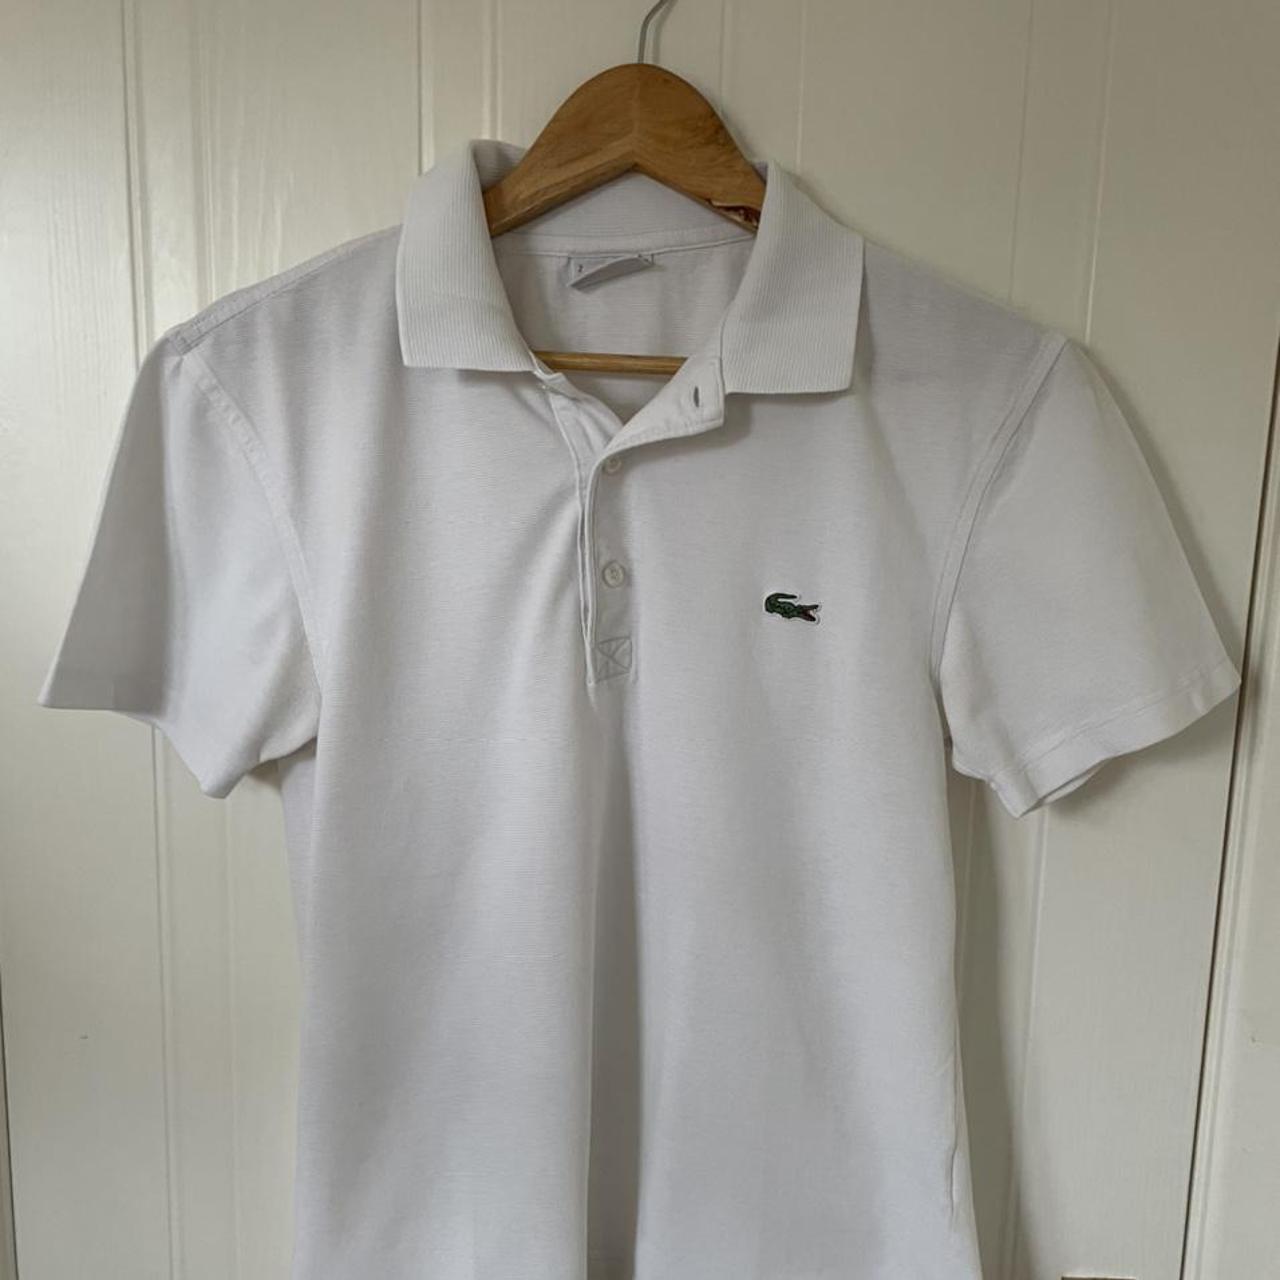 😍 Lacoste immaculate white mesh polo shirt size 2,... - Depop